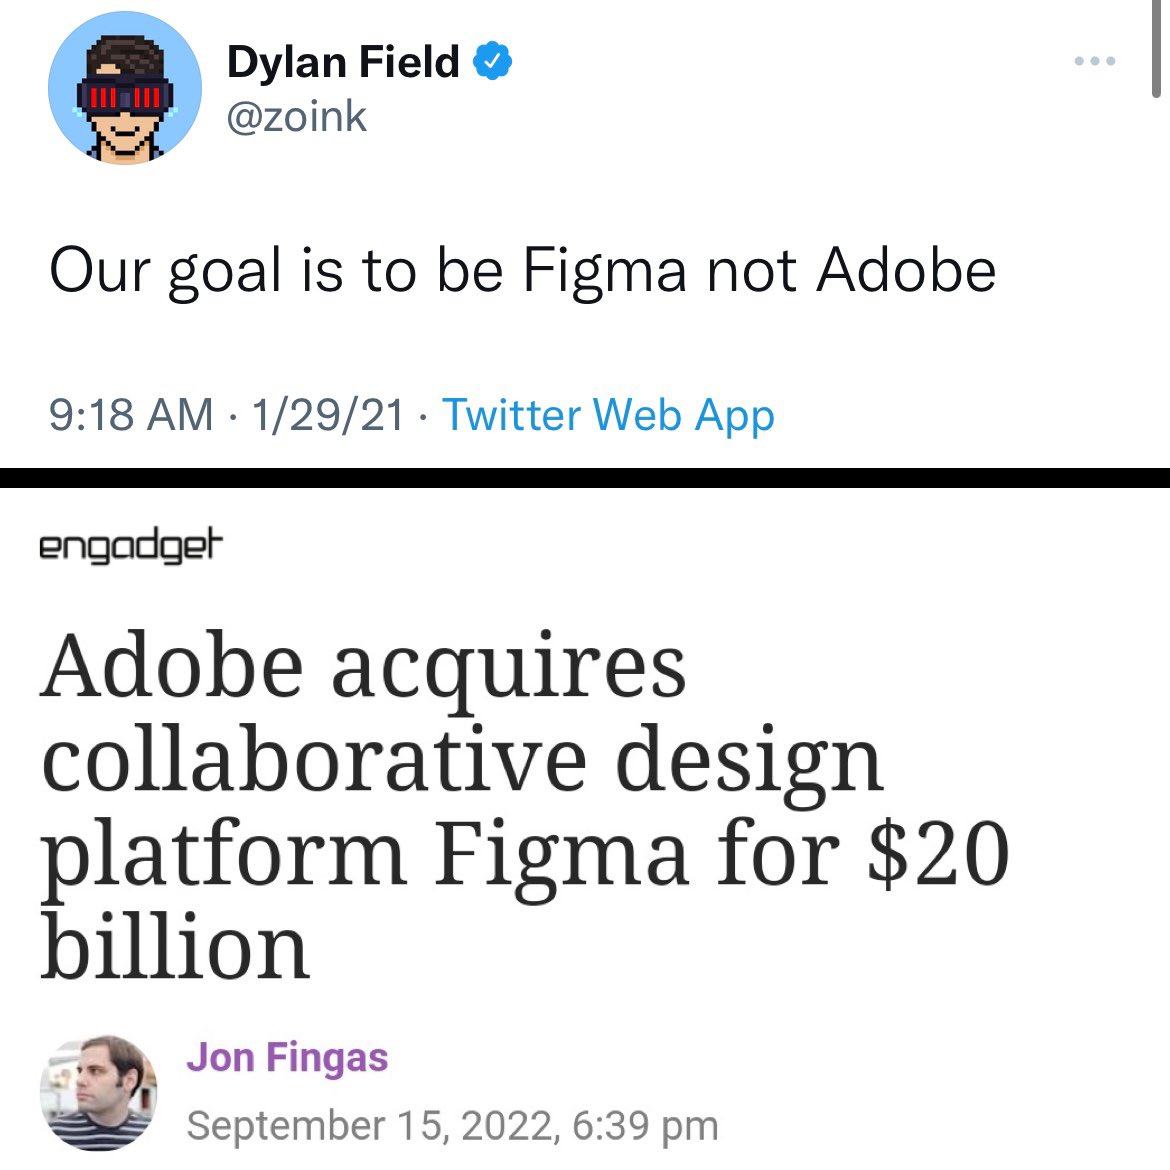 Dylan Field tweet saying "Our goal is to be Figma not Adobe", with engadget header below saying "Adobe acquires collaborative design platform Figma for $20 billion"